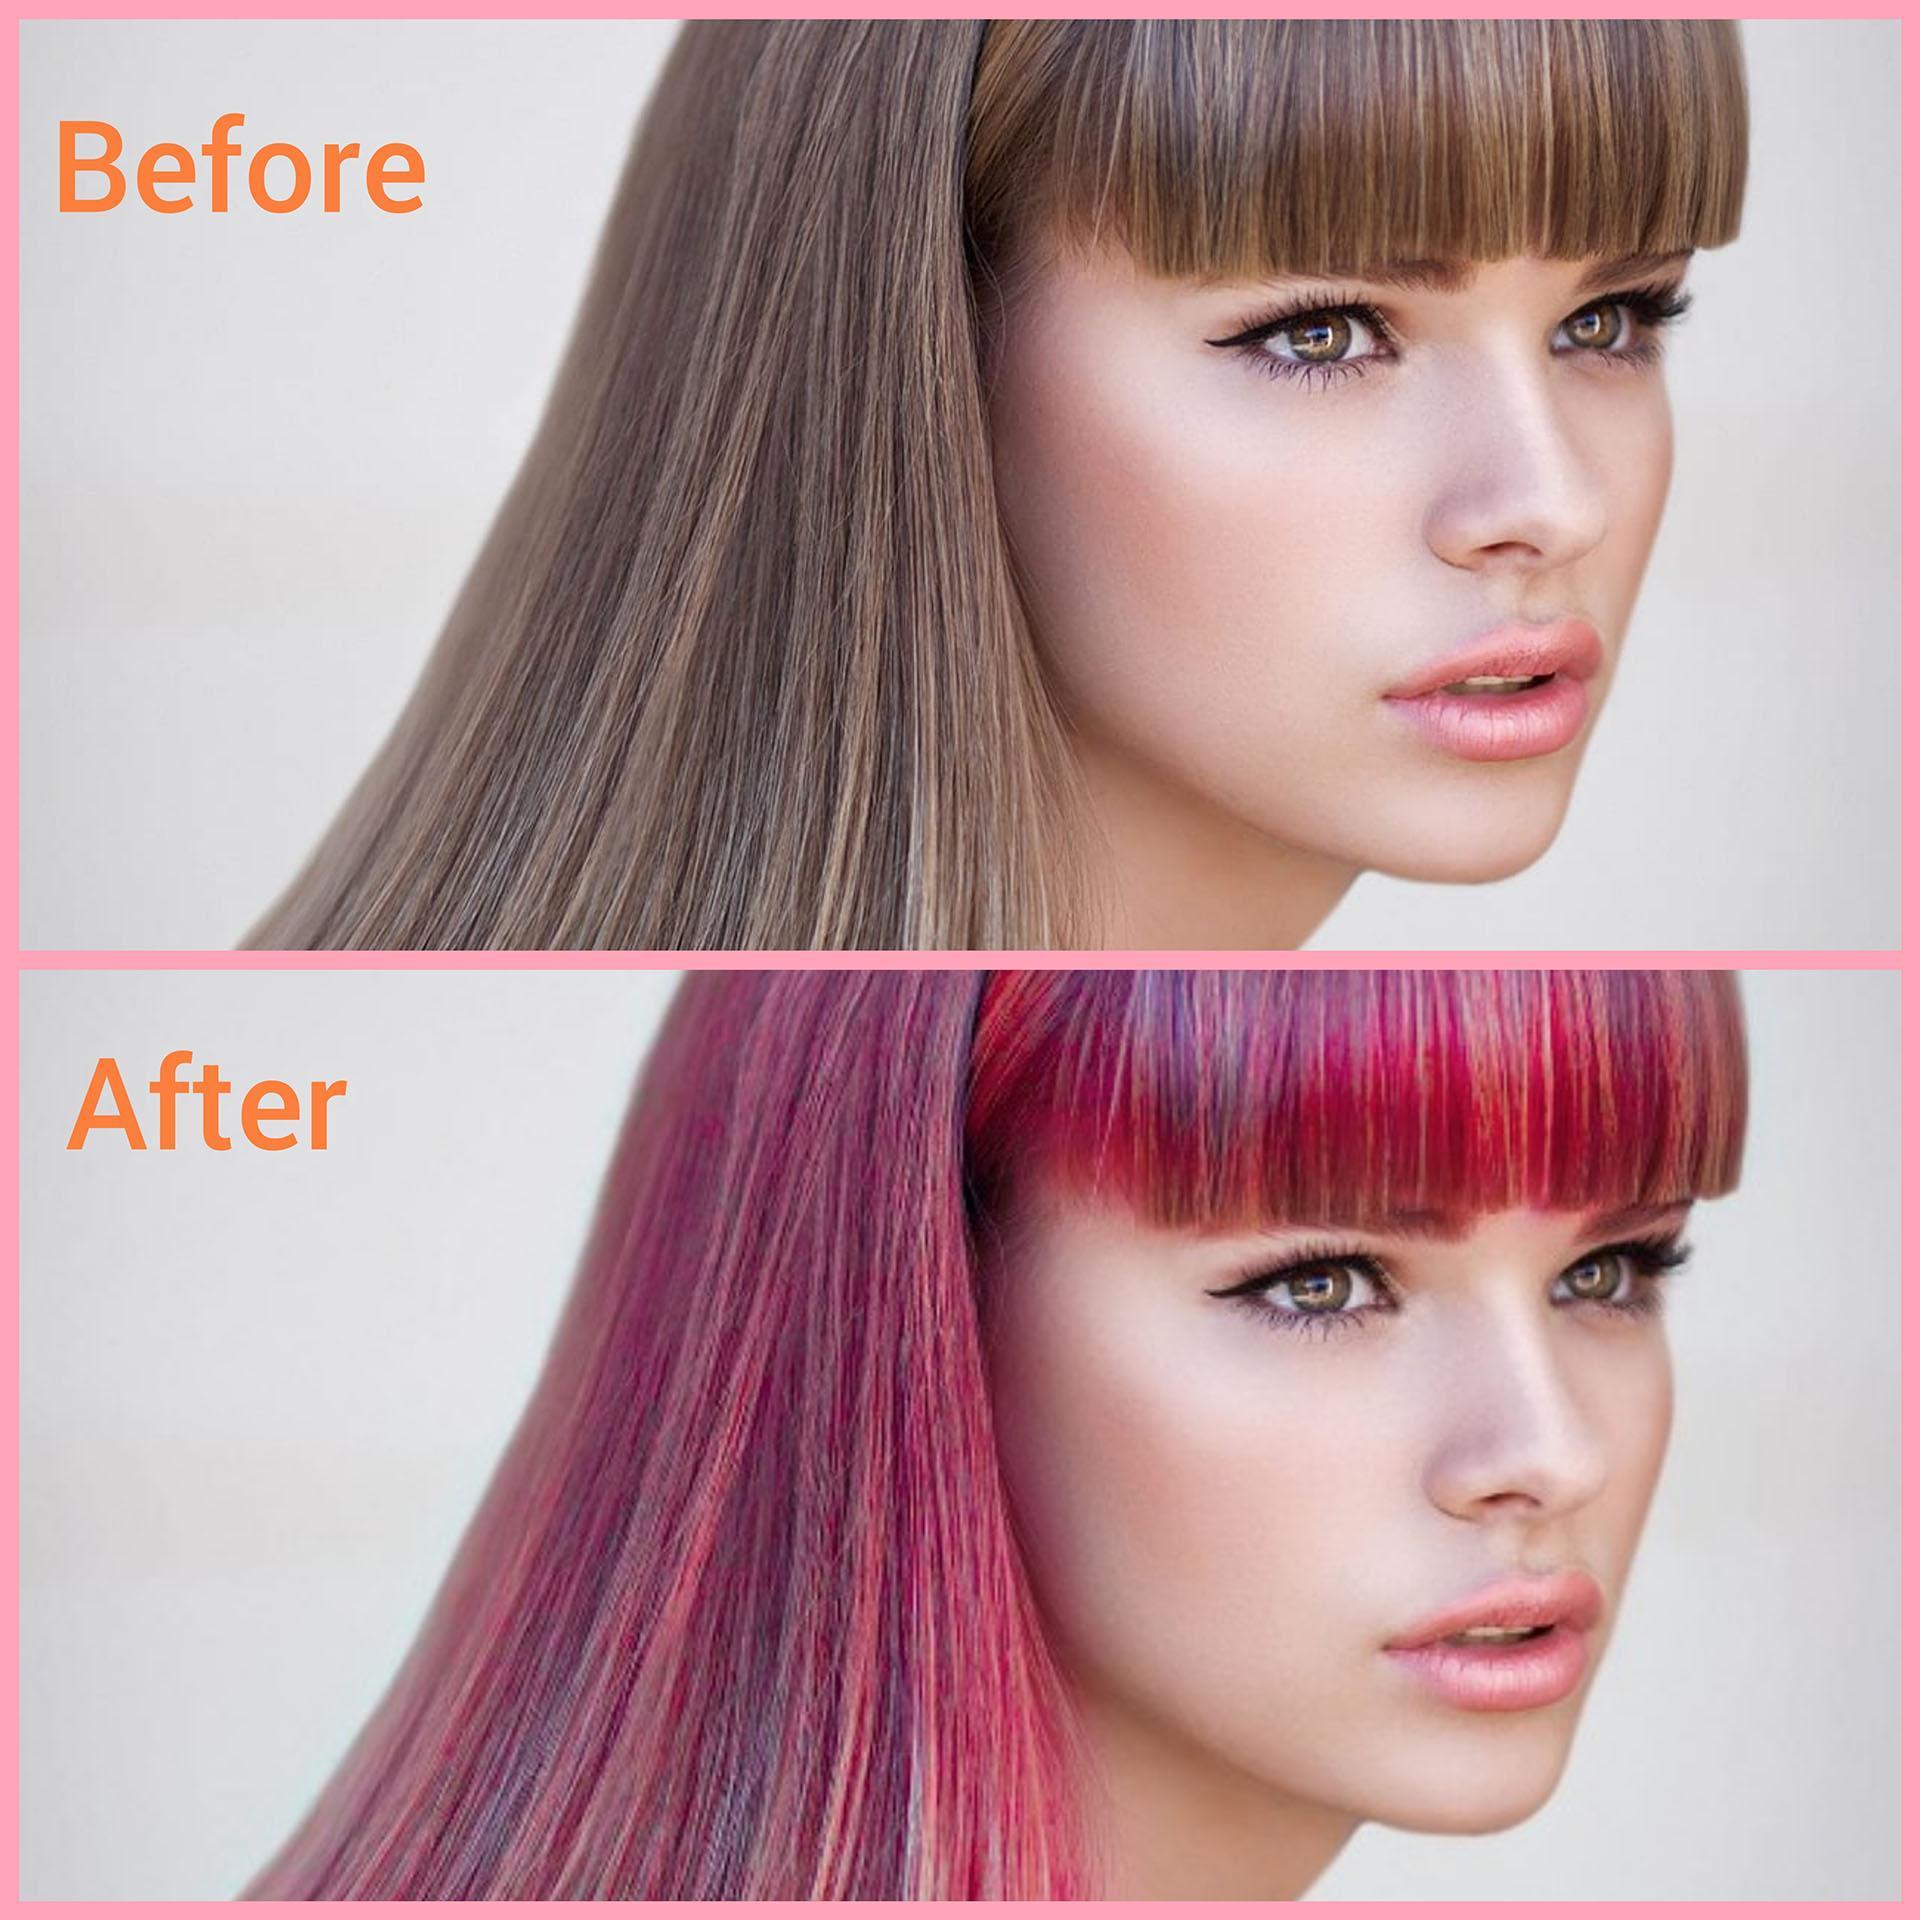 Hair color changer - Try different hair colors 1.10 Screenshot 1